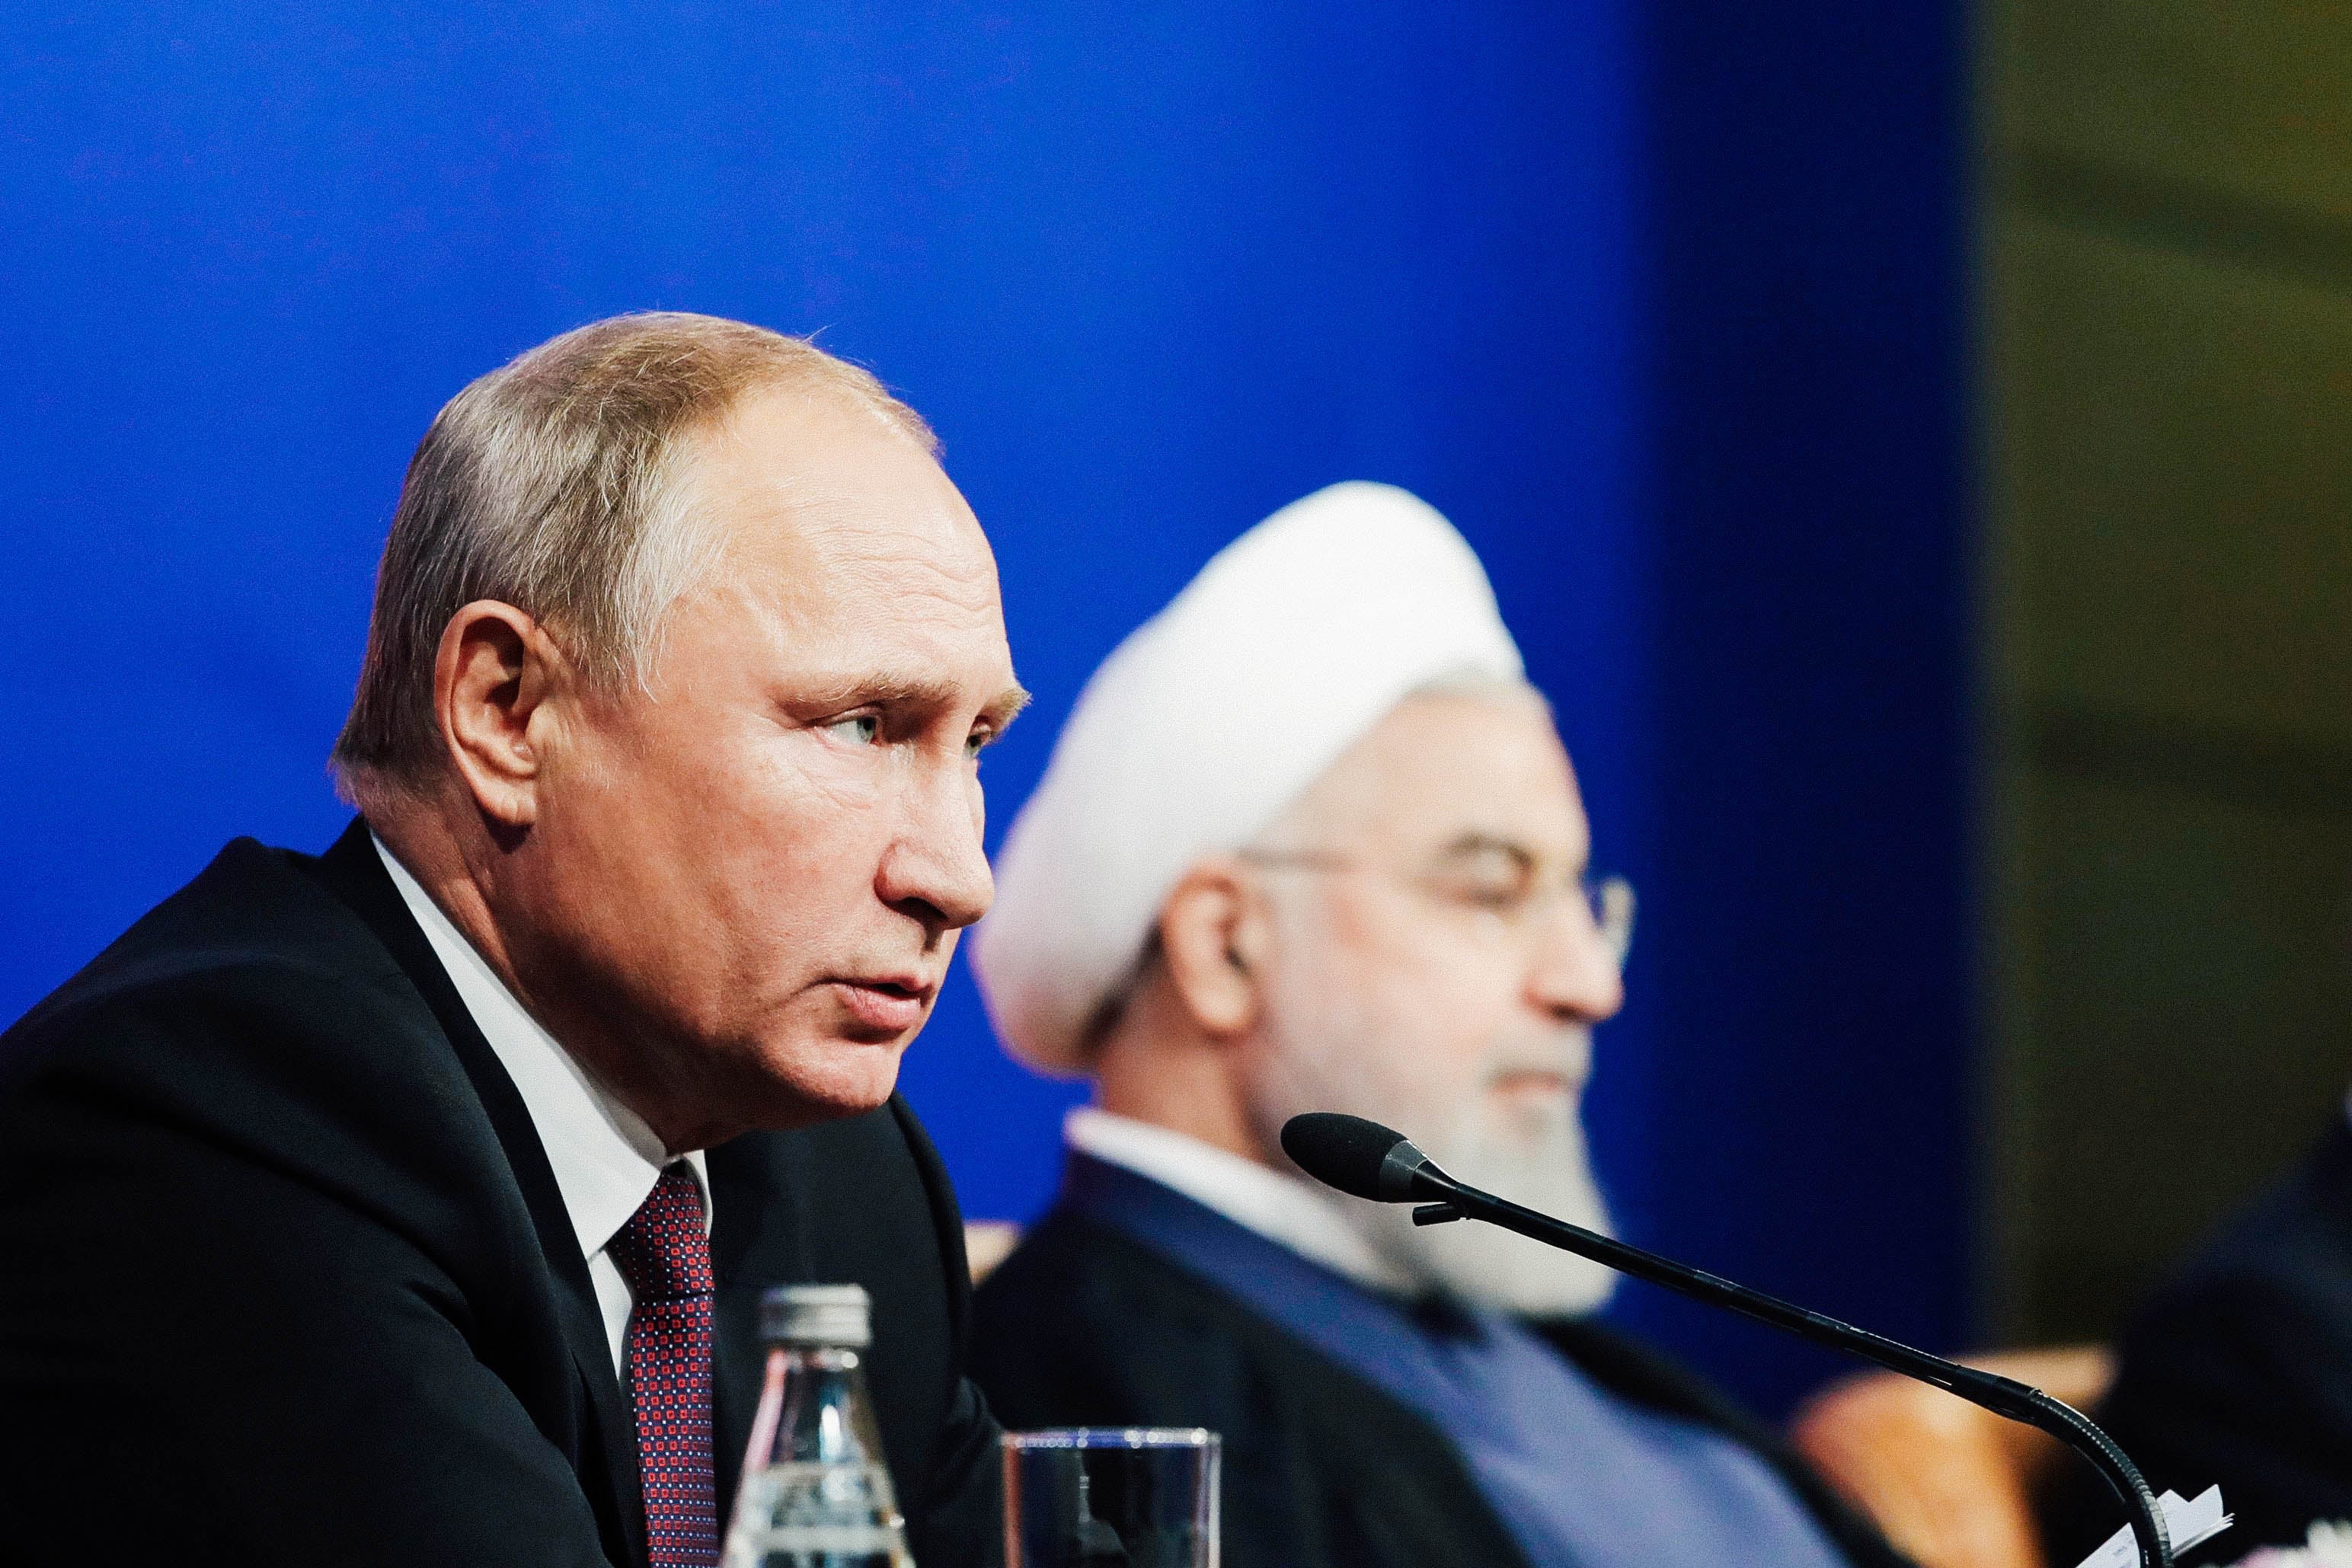 Vladimer Putin talking into a mic at a press table with Hassan Rouhai.